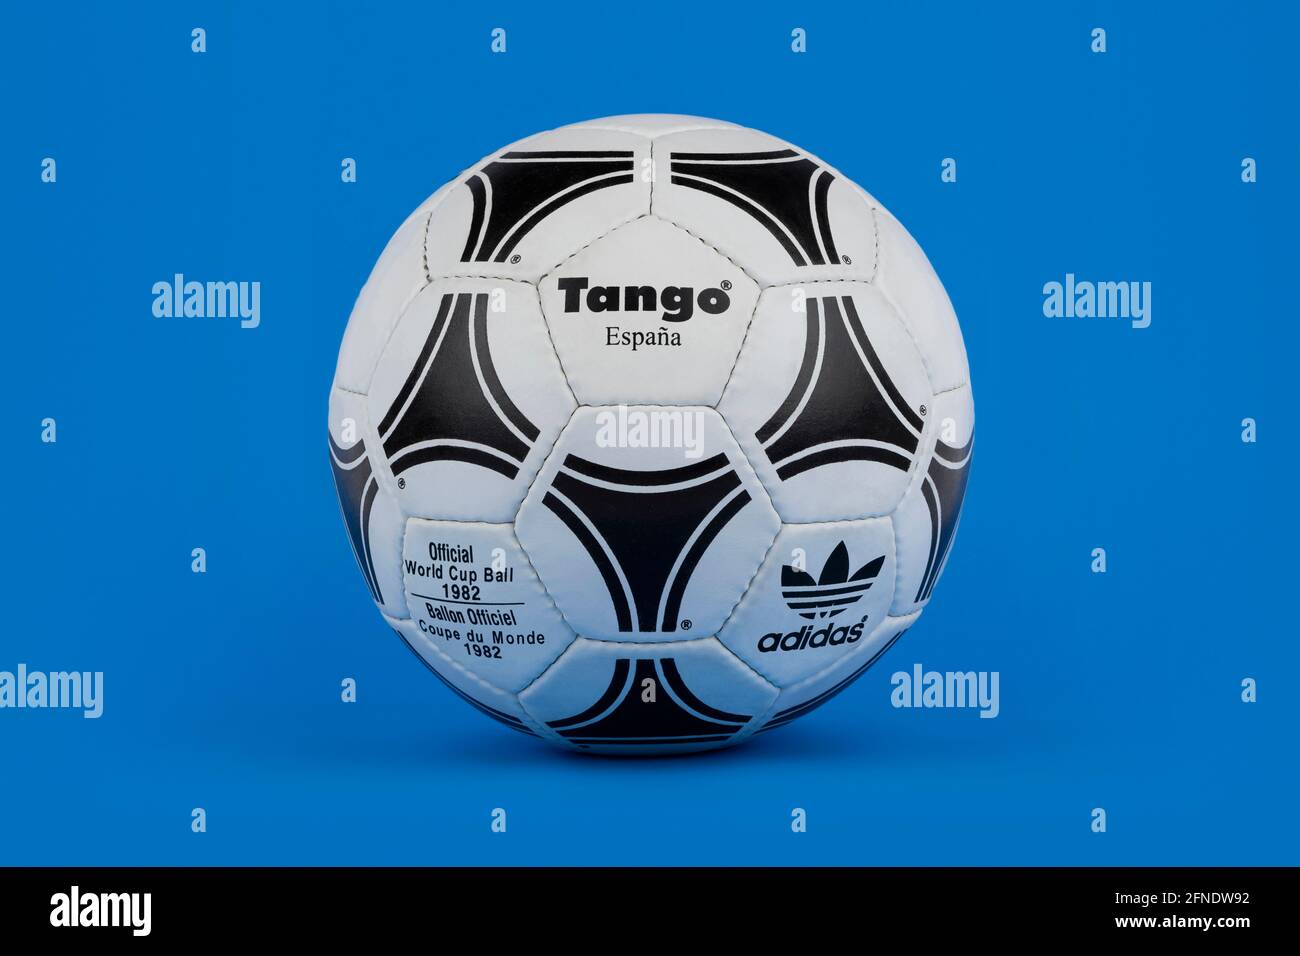 An Adidas Tango Espana football released for the 1982 FIFA World Cup, shot on a blue background Stock Photo